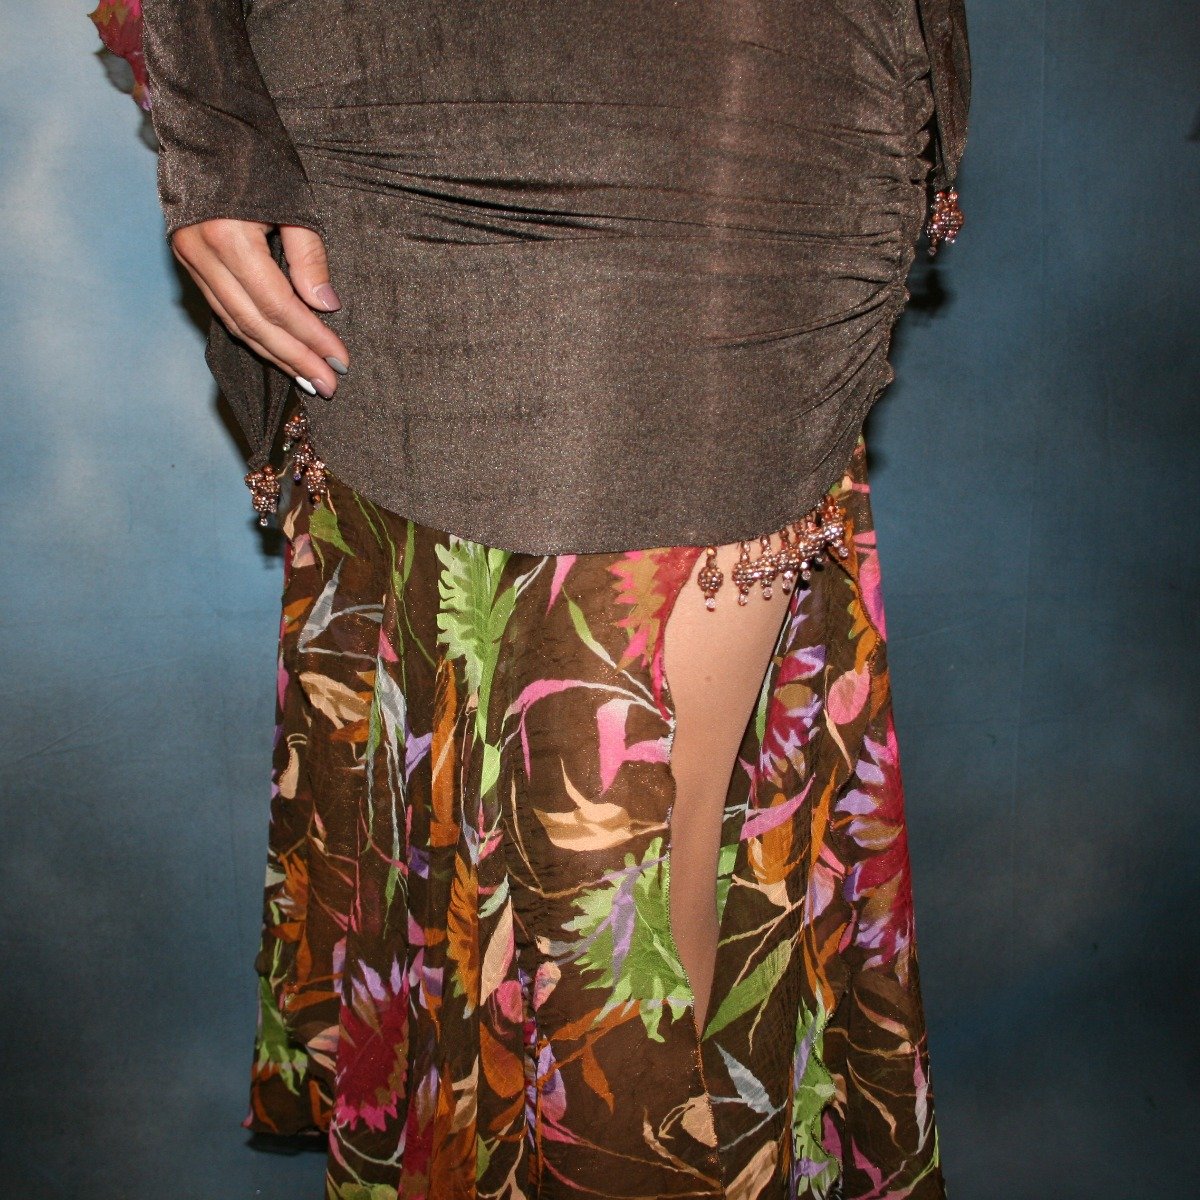 Crystal's Creations close up bottom view of brown ballroom dress created of luxurious chocolate brown slinky along with fall flowers print chiffon